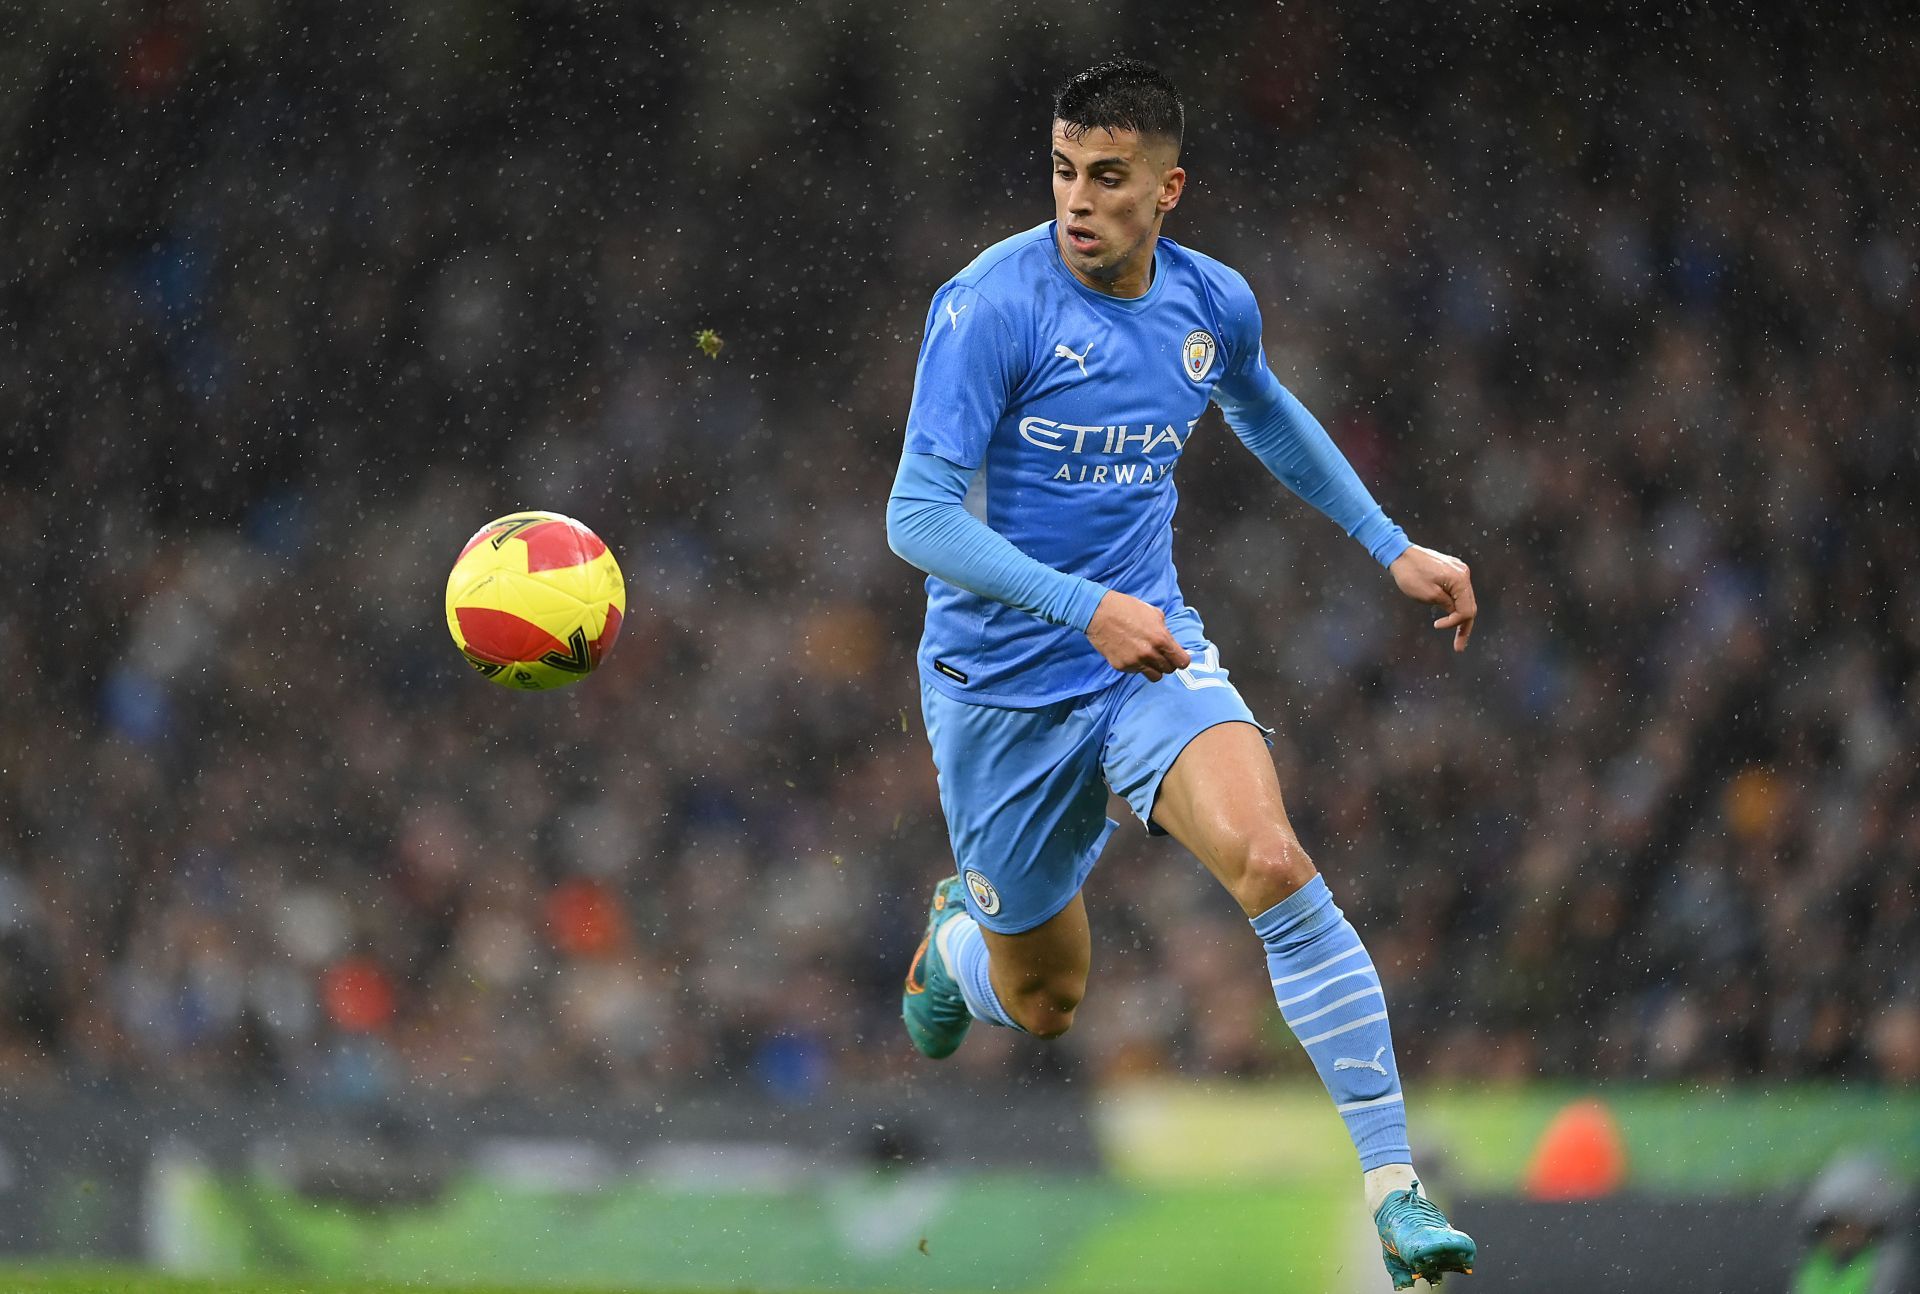 Joao Cancelo has been a key player for Manchester City.